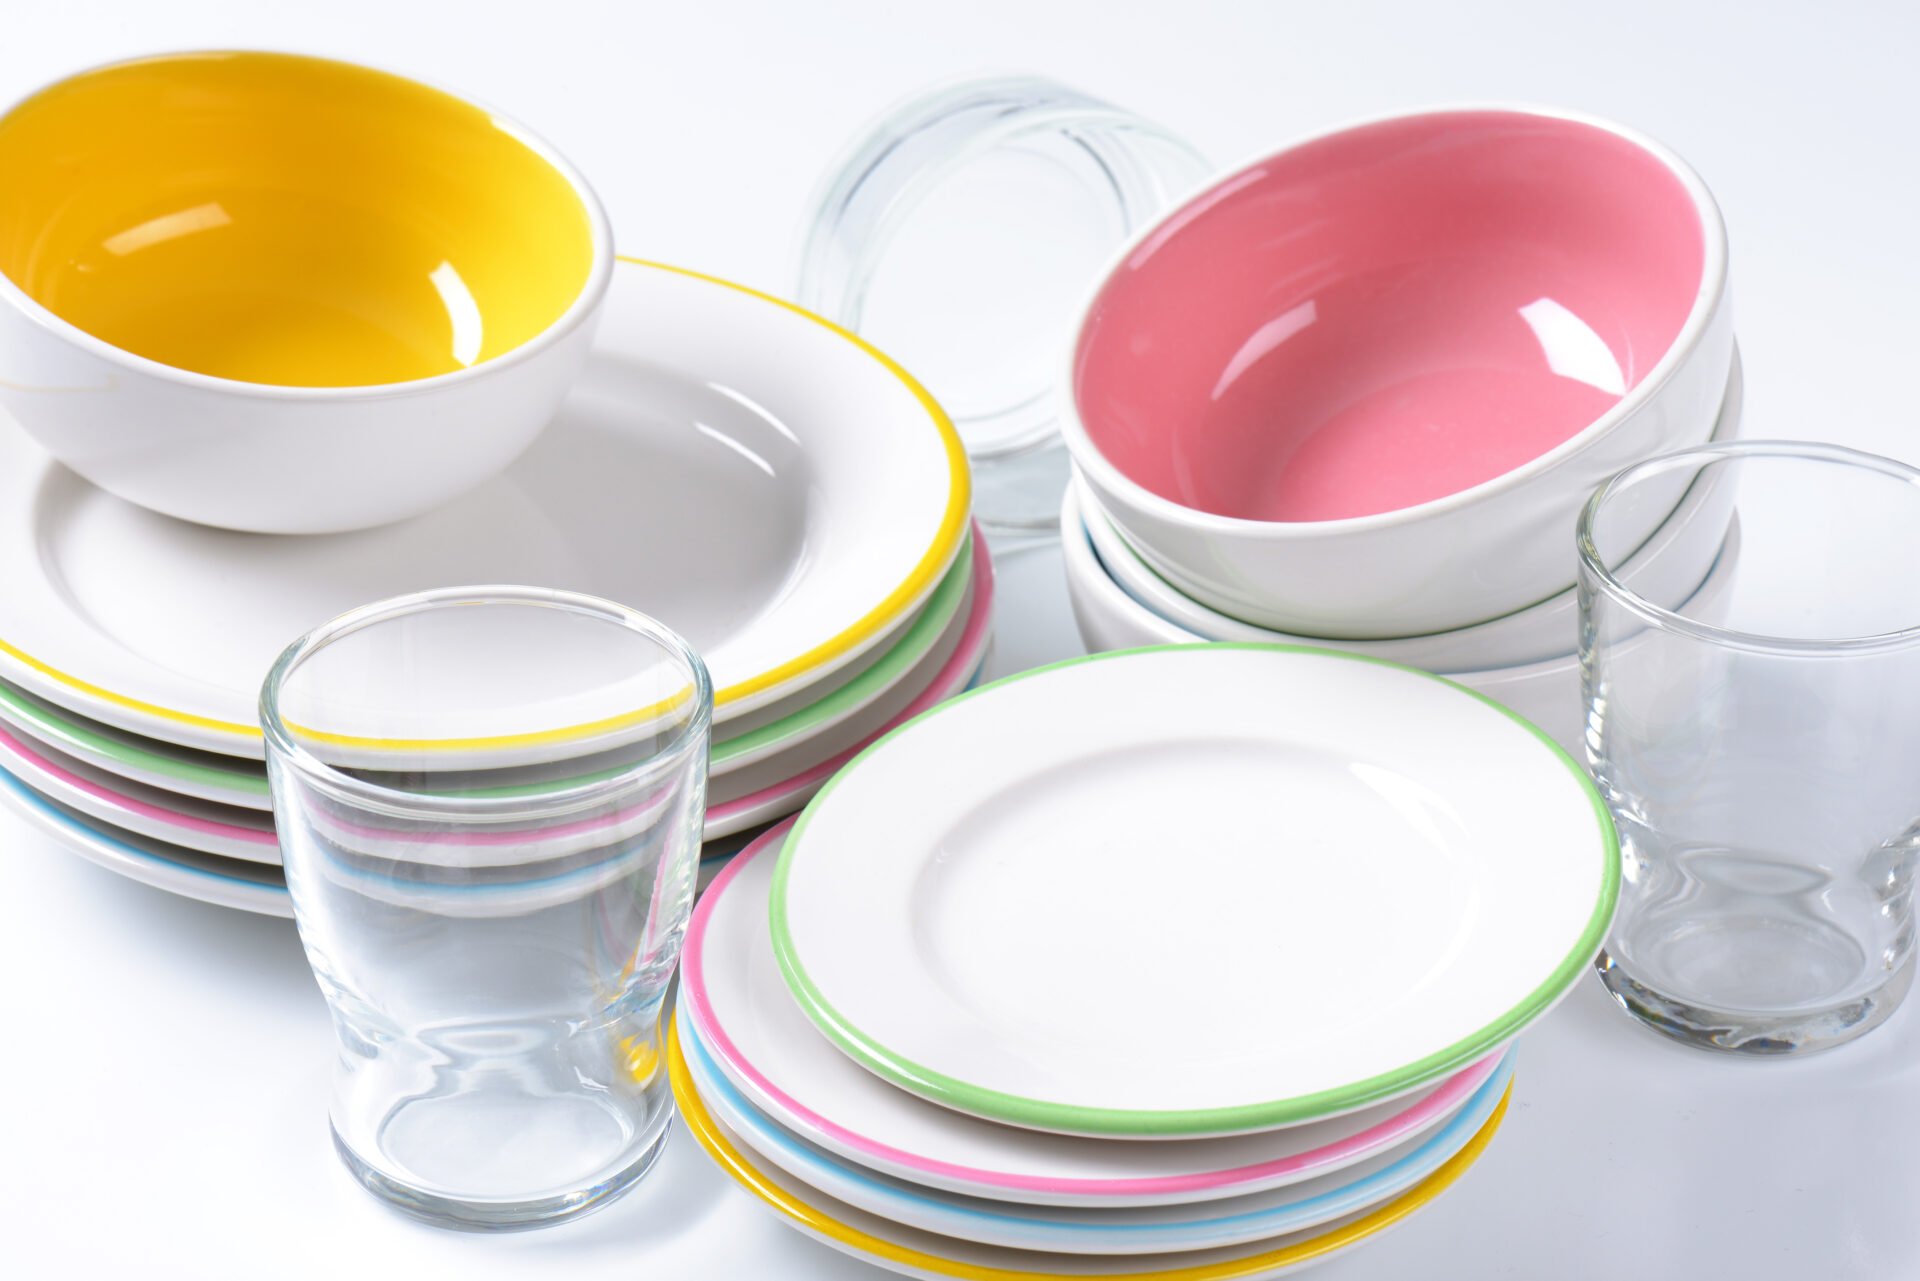 Toxic Dinnerware set consisting of deep bowls, dinner plates, side plates and glasses